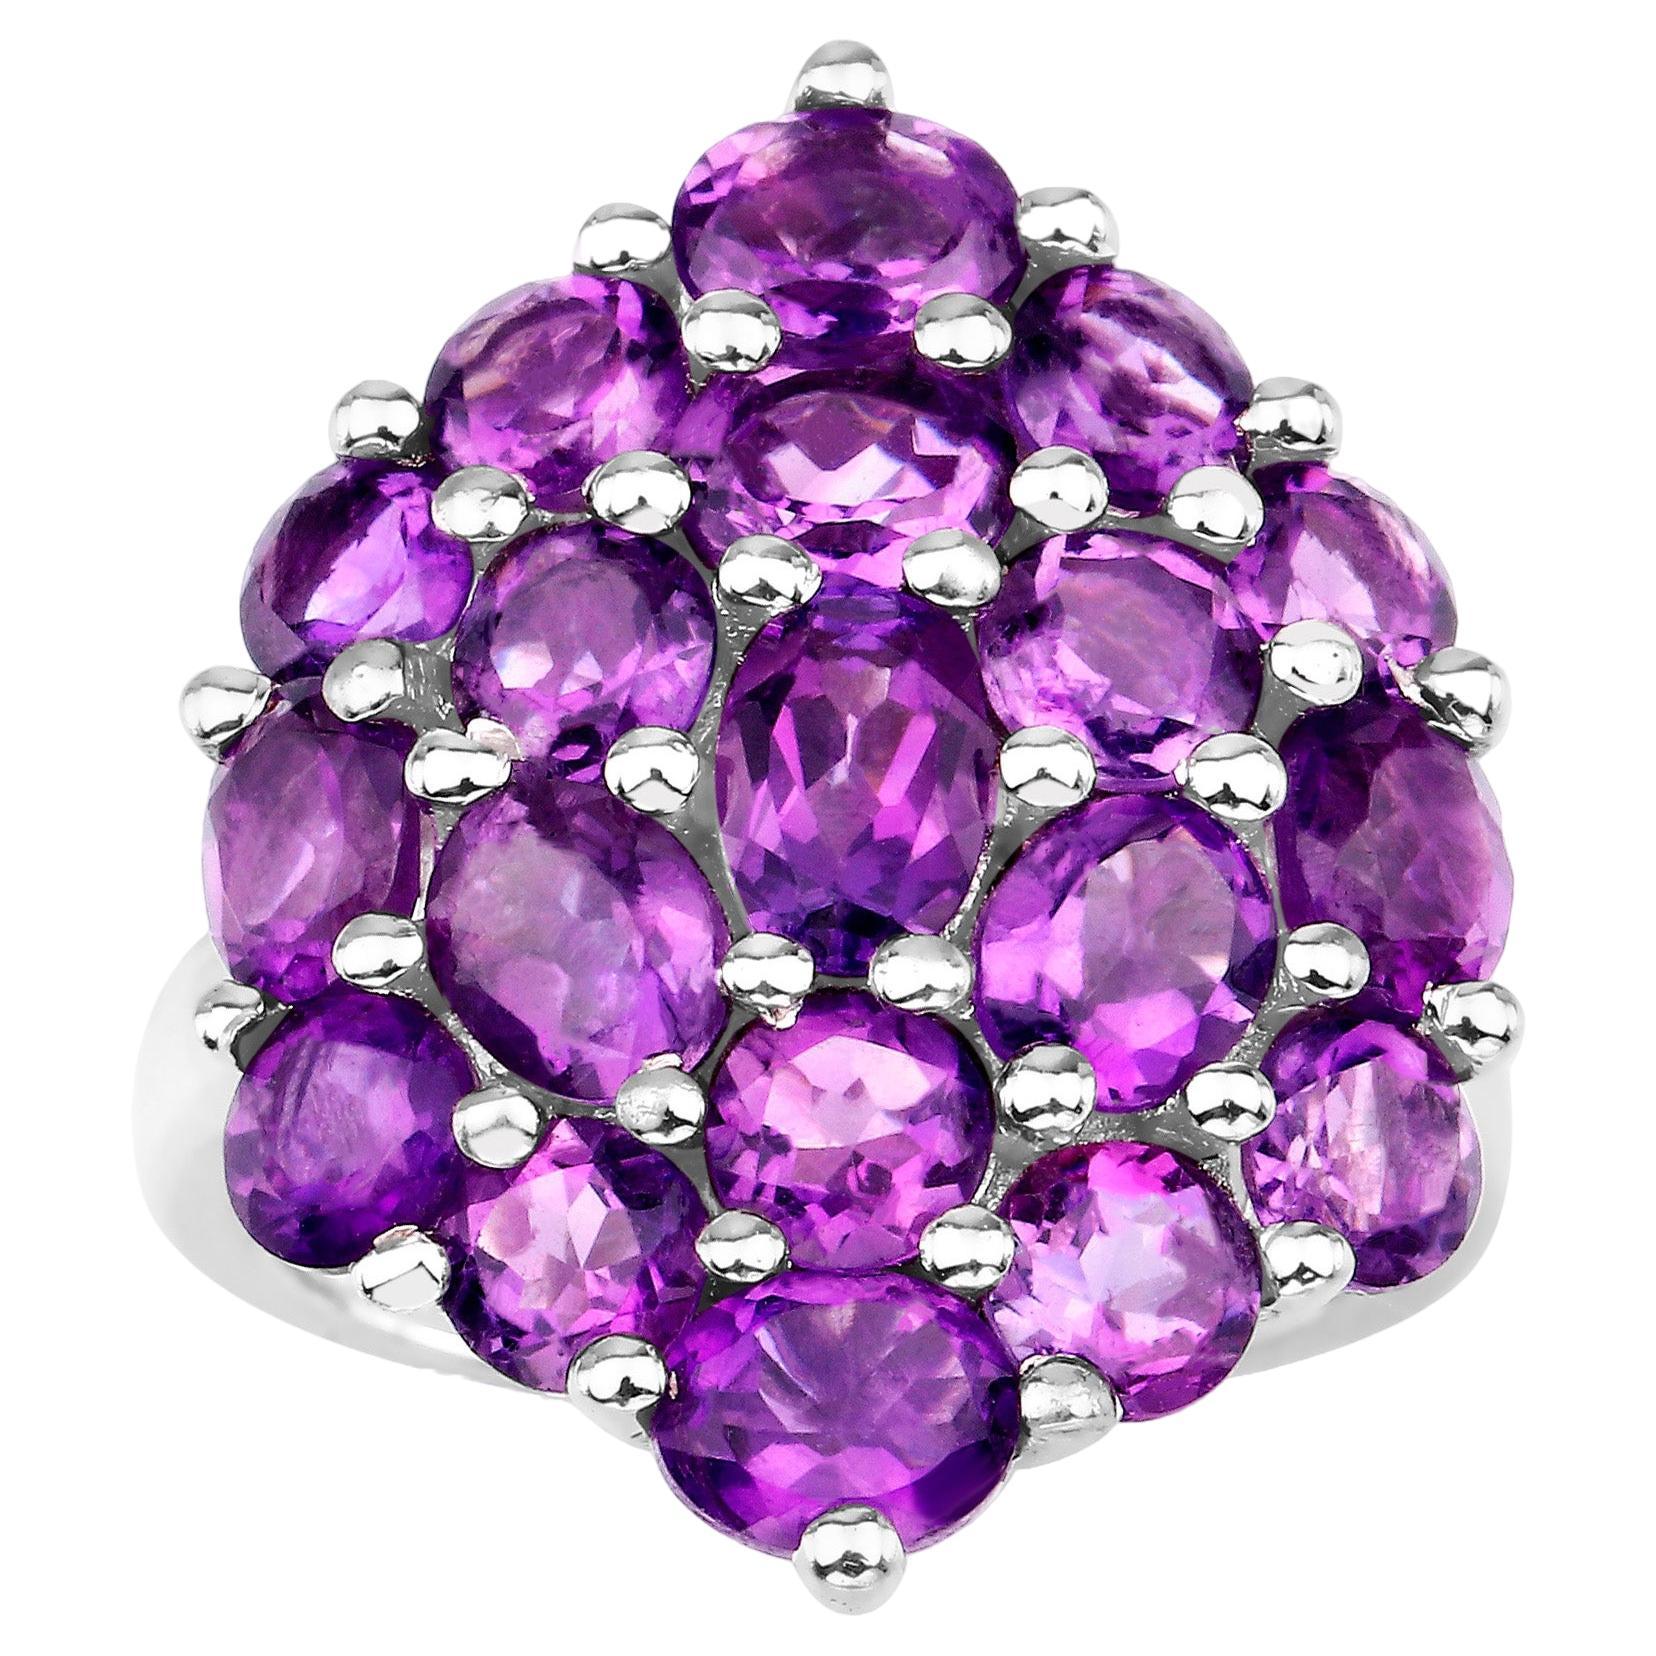 Stunning 5.50 Carats Natural Amethyst Cocktail Ring Sterling Silver